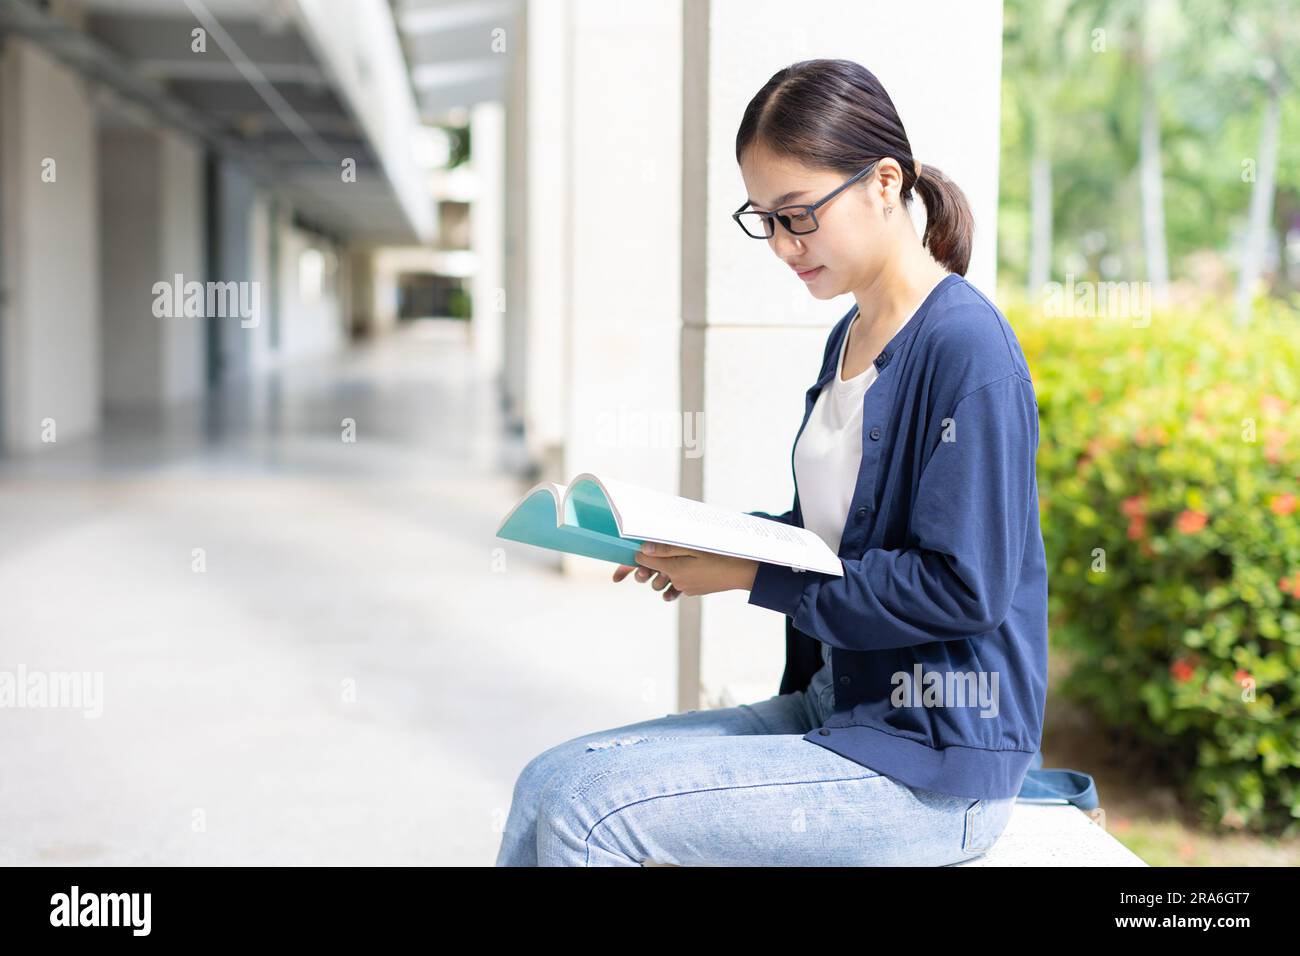 Smart woman sitting reading a book use free time for learning education bookworm nerd in university. Stock Photo